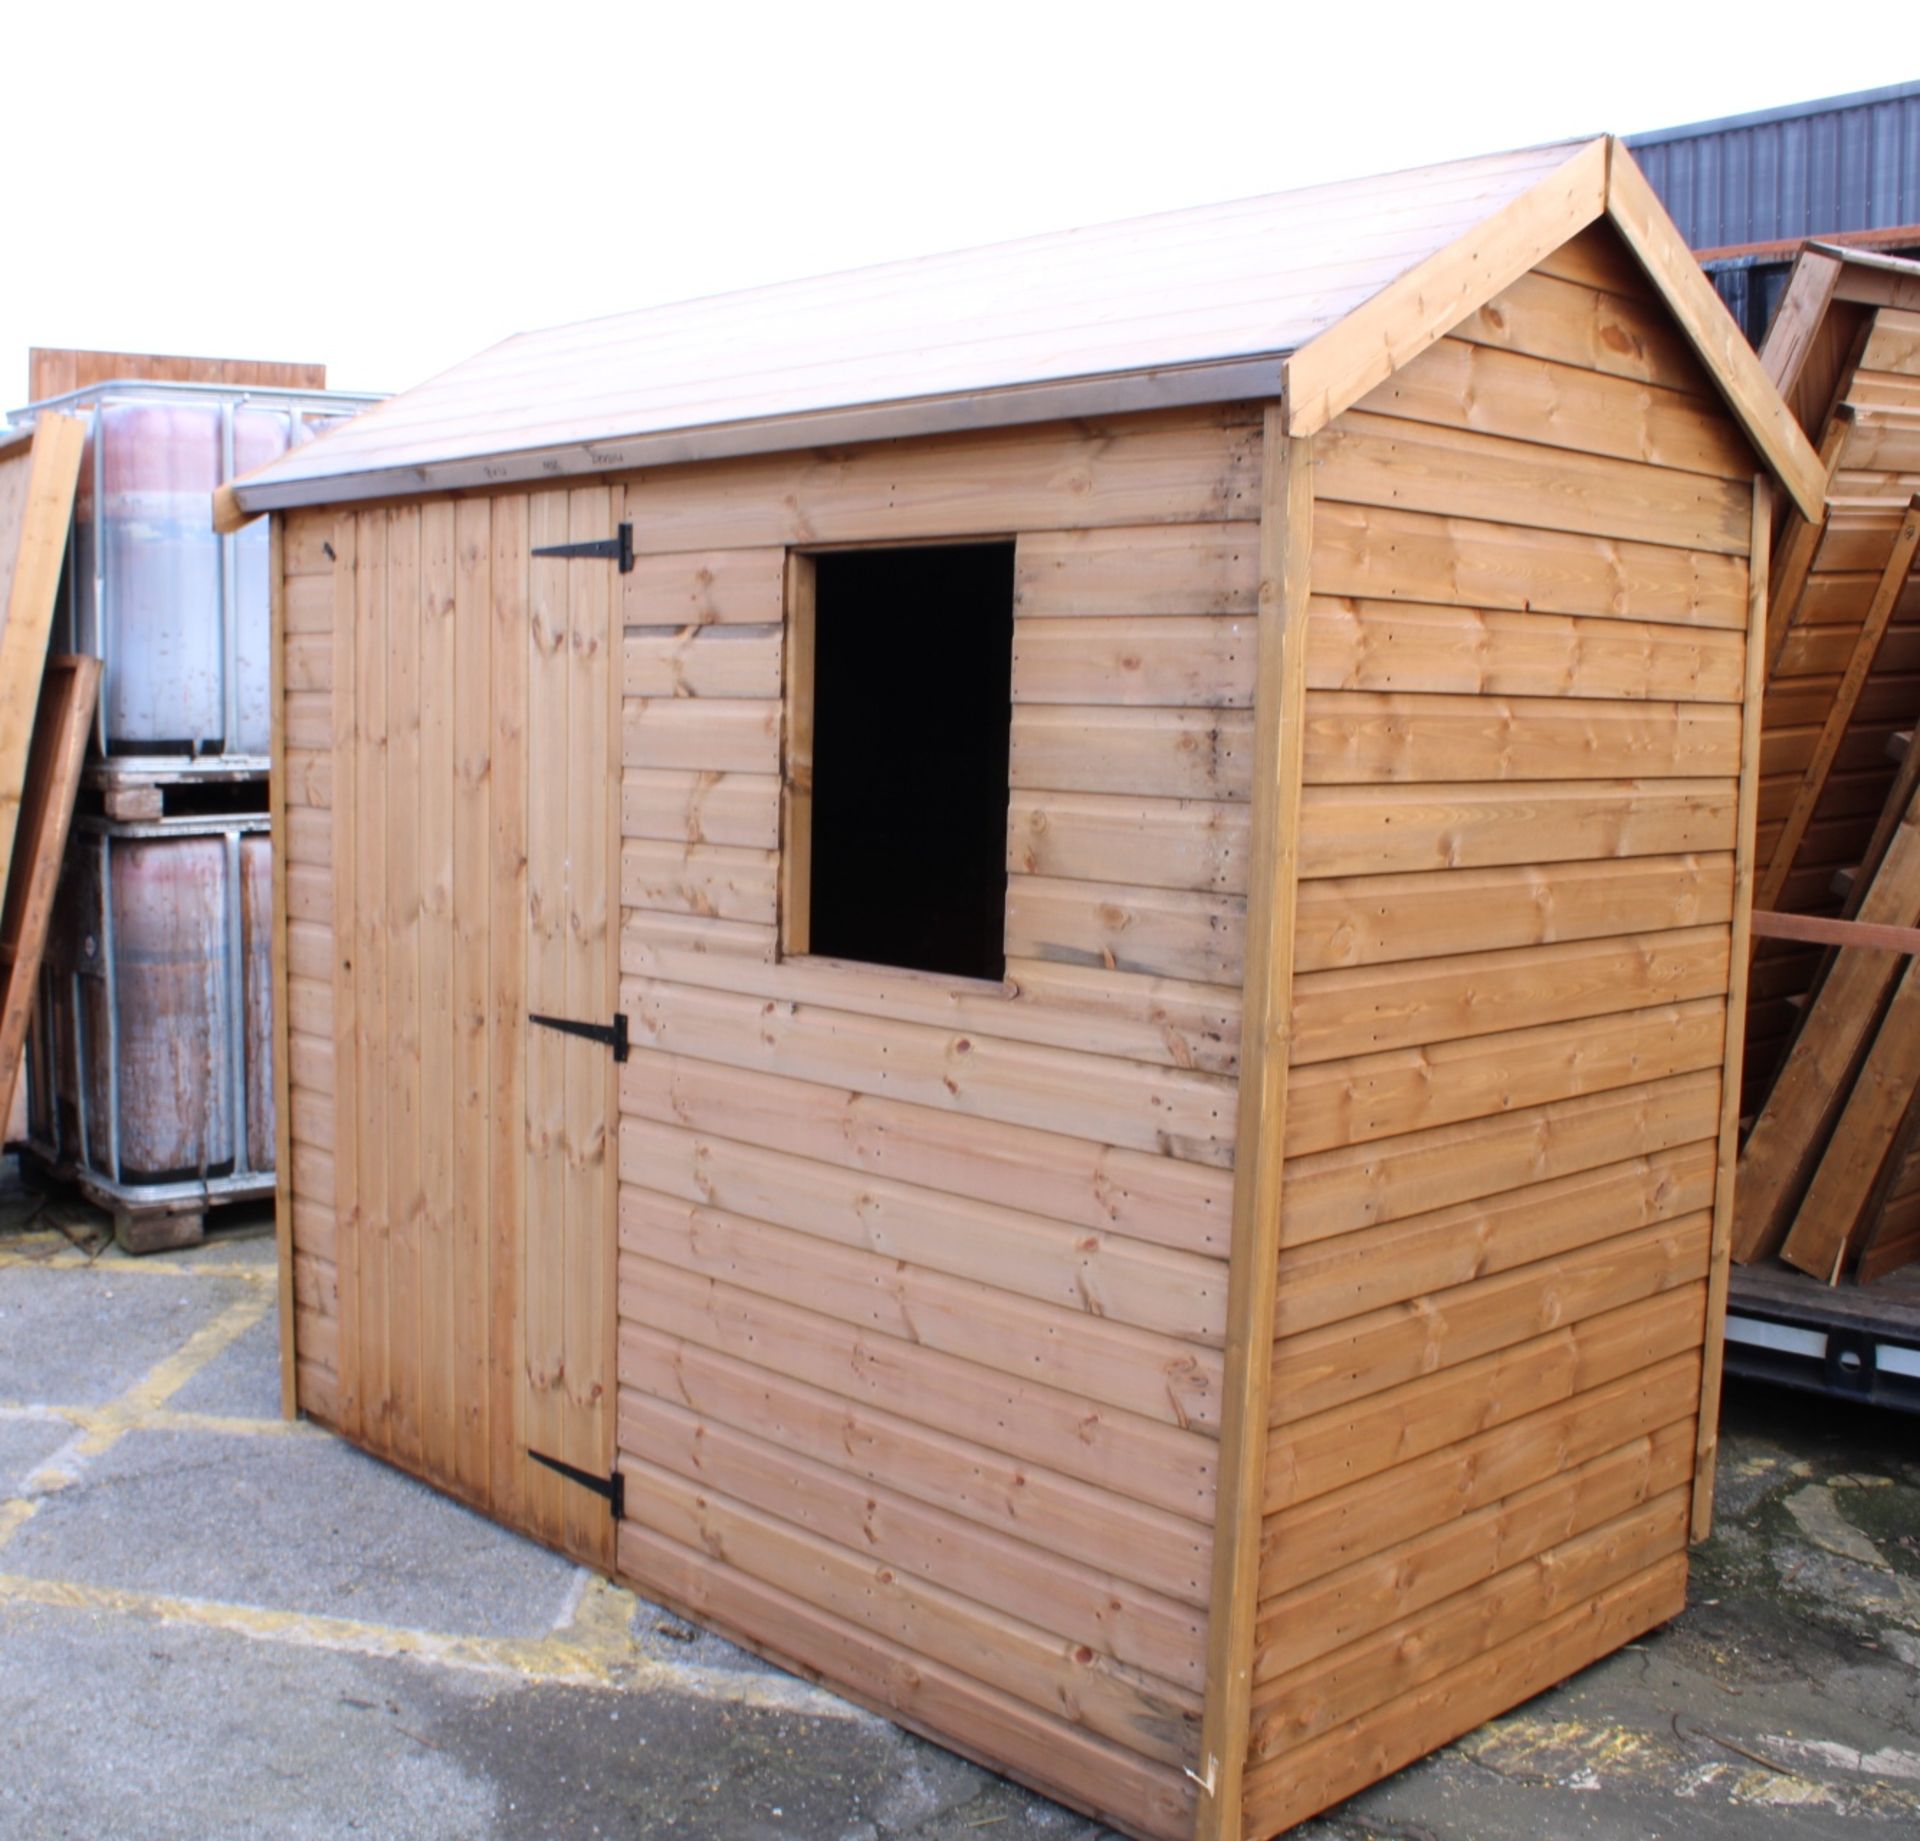 8x4 superior apex shed, Standard 16mm Nominal Cladding RRP£ 720 - Image 2 of 3